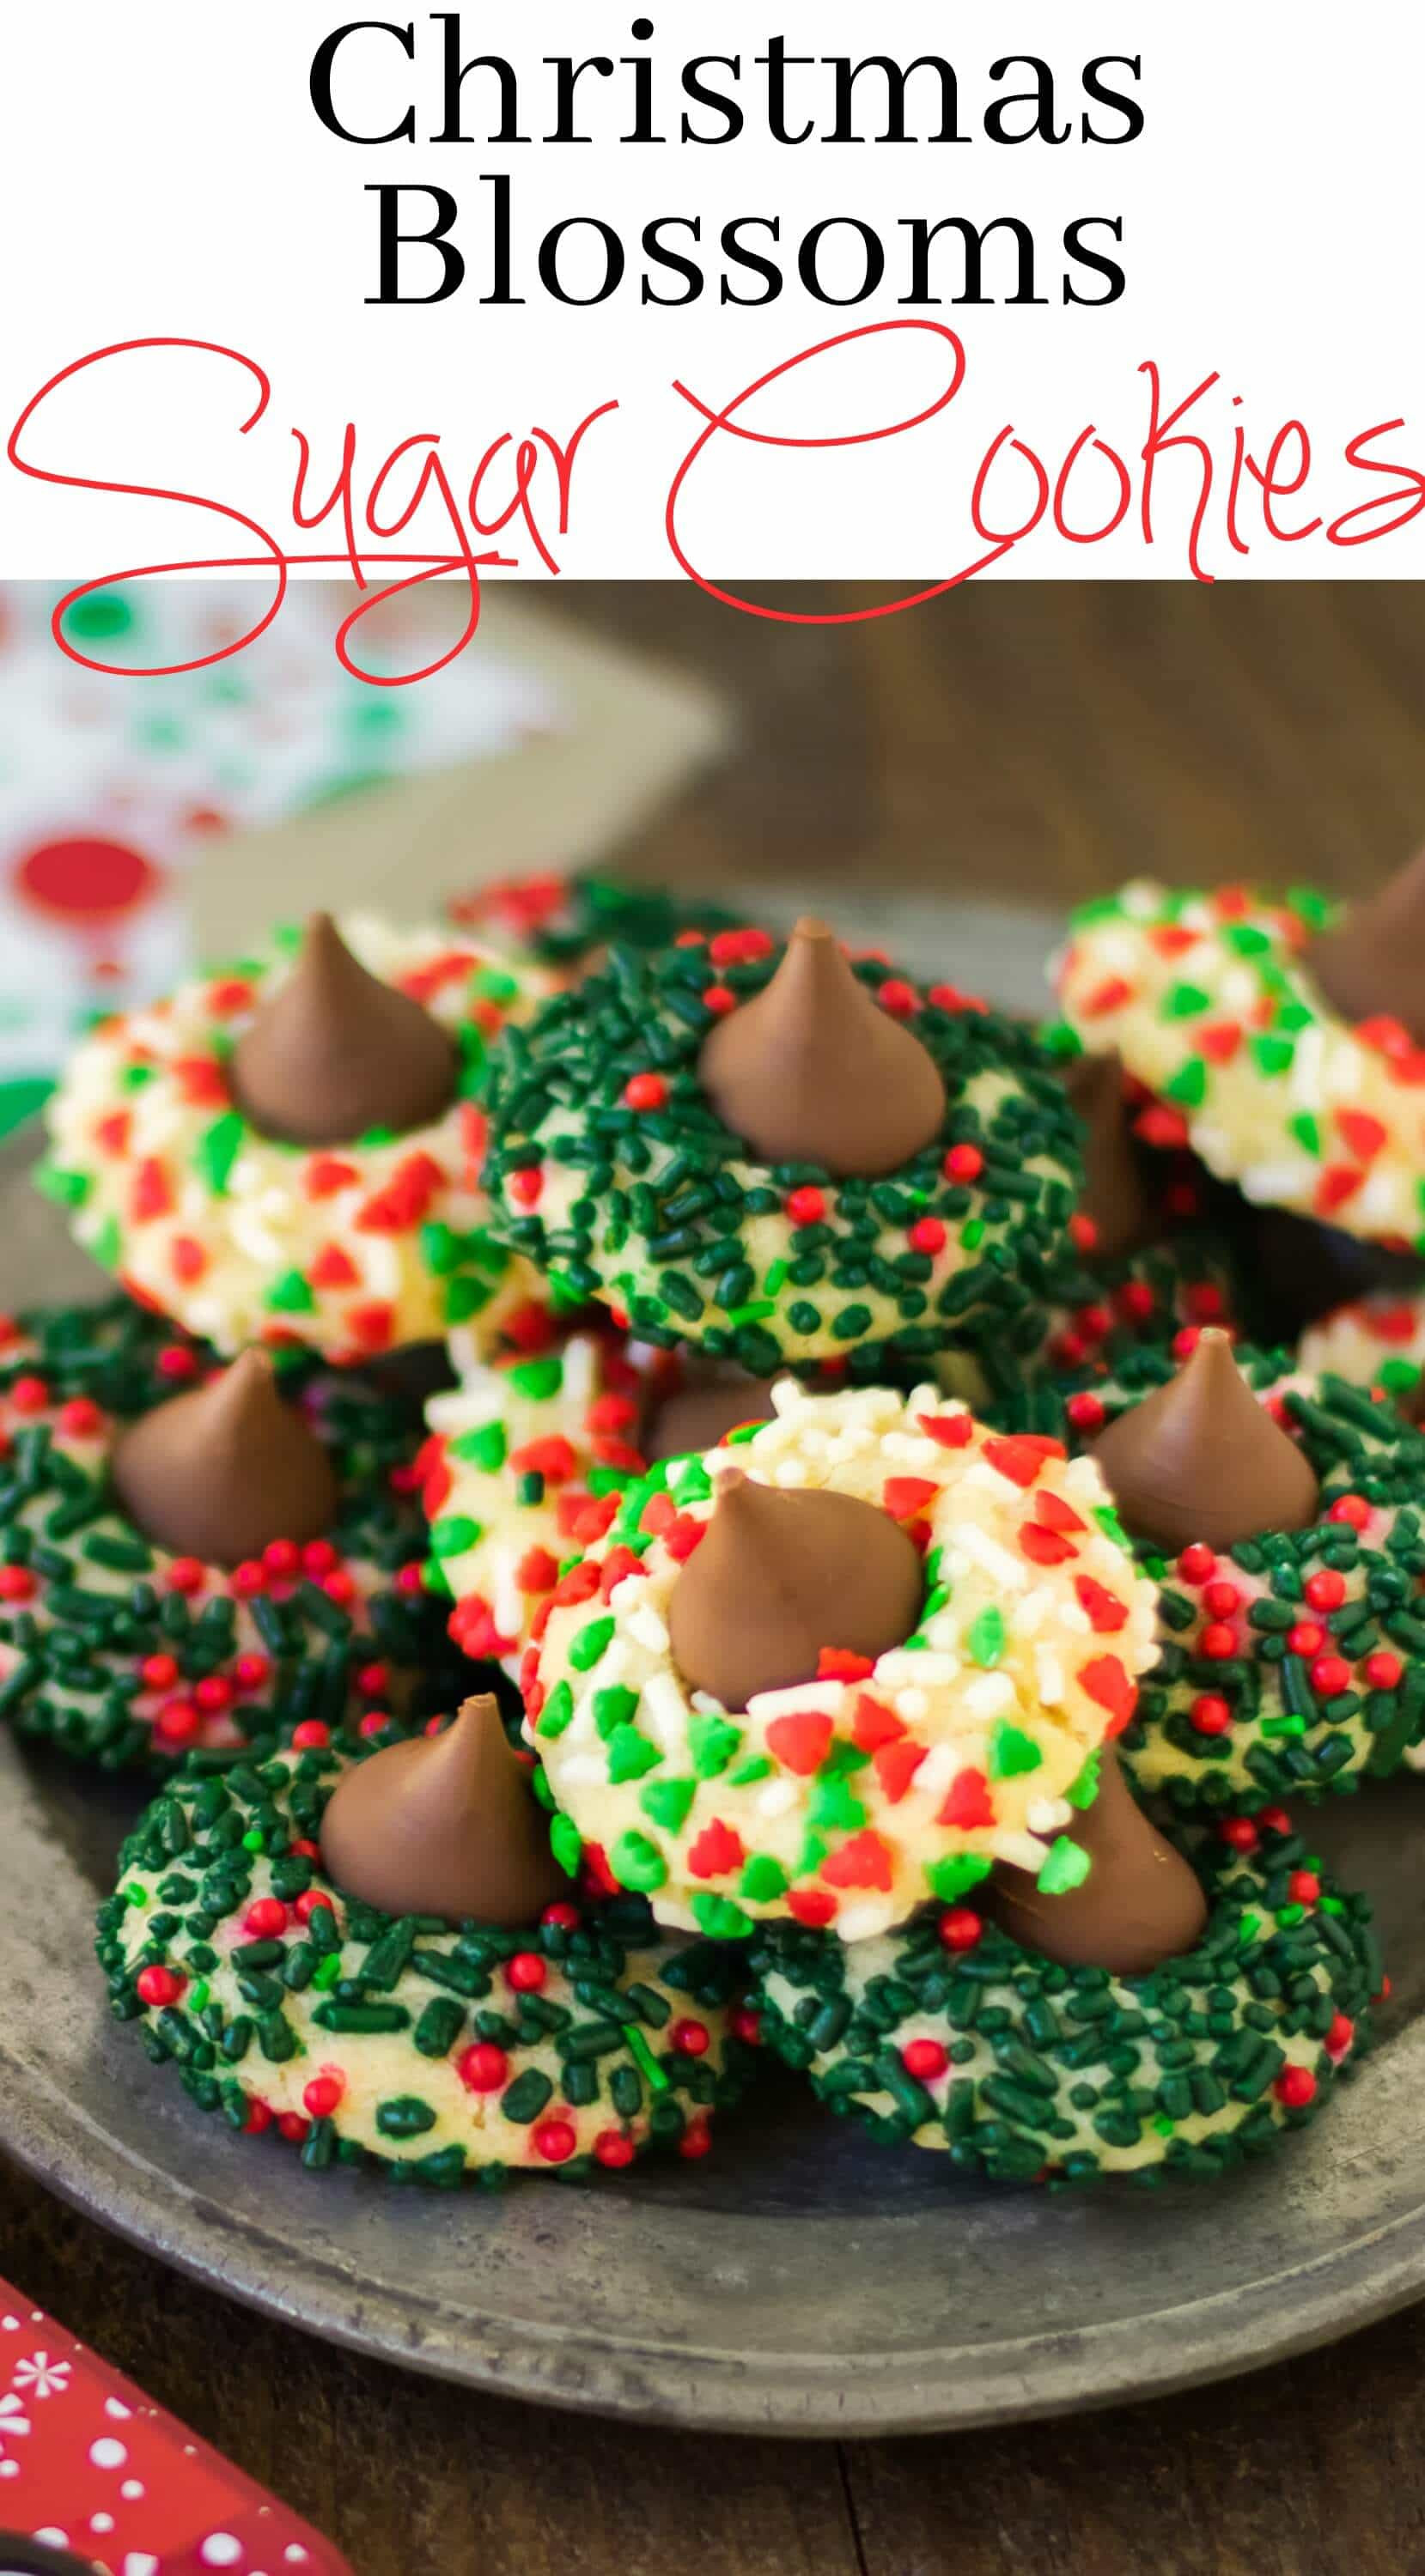 Best Christmas Sugar Cookies
 Christmas Cookie Recipes The Best Ideas for Your Cookie